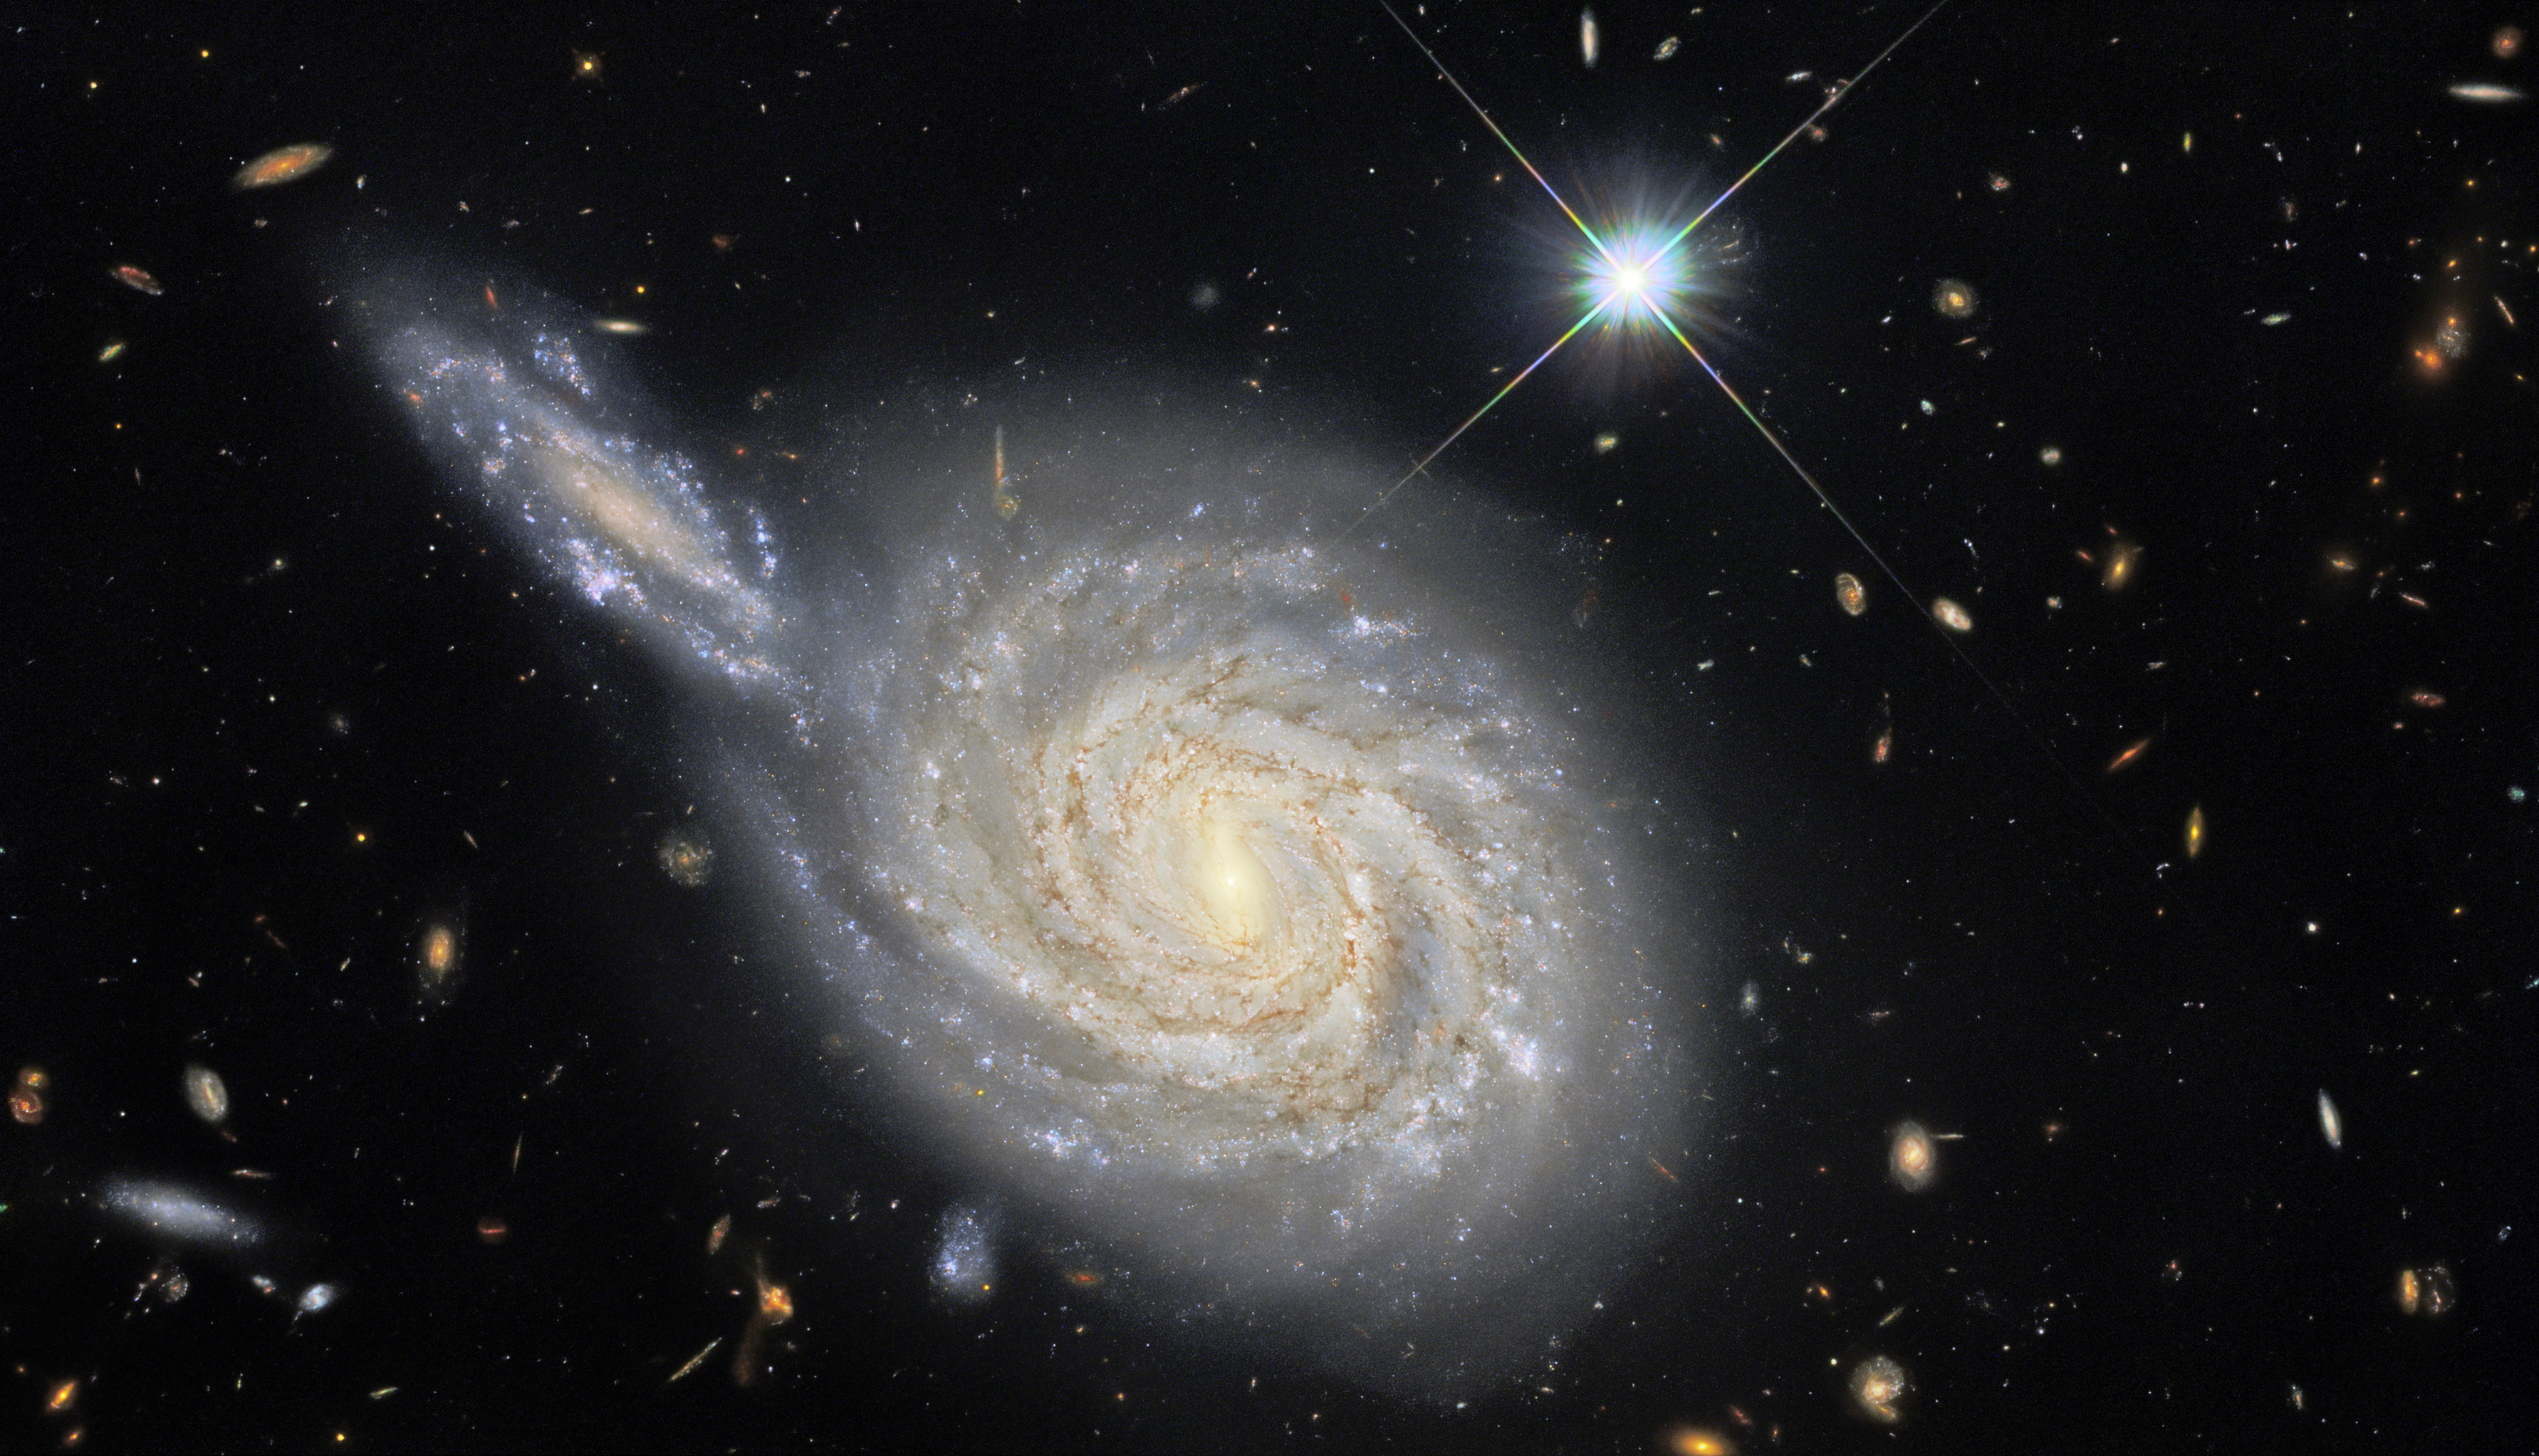 This image from the NASA/ESA Hubble Space Telescope captures the spiral galaxy NGC 105, which lies roughly 215 million light-years away in the constellation Pisces. While it looks like NGC 105 is plunging edge-on into a collision with a neighbouring galaxy, this is just the result of the chance alignment of the two objects in the night sky. NGC 105’s elongated neighbour is actually far more distant and remains relatively unknown to astronomers. These misleading conjunctions occur frequently in astronomy — for example, the stars in constellations are at vastly different distances from Earth, and only appear to form patterns thanks to the chance alignment of their component stars. The Wide Field Camera 3 observations in this image are from a vast collection of Hubble measurements examining nearby galaxies which contain two fascinating astronomical phenomena — Cepheid variables and cataclysmic supernova explosions. Whilst these two phenomena may appear to be unrelated — one is a peculiar class of pulsating stars and the other is the explosion caused by the catastrophic final throes of a massive star’s life — they are both used by astronomers for a very particular purpose: measuring the vast distances to astronomical objects. Both Cepheids and supernovae have very predictable luminosities, meaning that astronomers can tell precisely how bright they are. By measuring how bright they appear when observed from Earth, these “standard candles” can provide reliable distance measurements. NGC 105 contains both supernovae and Cepheid variables, giving astronomers a valuable opportunity to calibrate the two distance measurement techniques against one another. Astronomers recently carefully analysed the distances to a sample of galaxies including NGC 105 to measure how fast the Universe is expanding — a value known as the Hubble constant. Their results don’t agree with the predictions of the most widely-accepted cosmological model, and their analysis shows that there is only a 1-in-a-million chance that this discrepancy was caused by measurement errors. This discrepancy between galaxy measurements and cosmological predictions has been a long-standing source of consternation for astronomers, and these recent findings provide persuasive new evidence that something is either wrong or lacking in our standard model of cosmology.